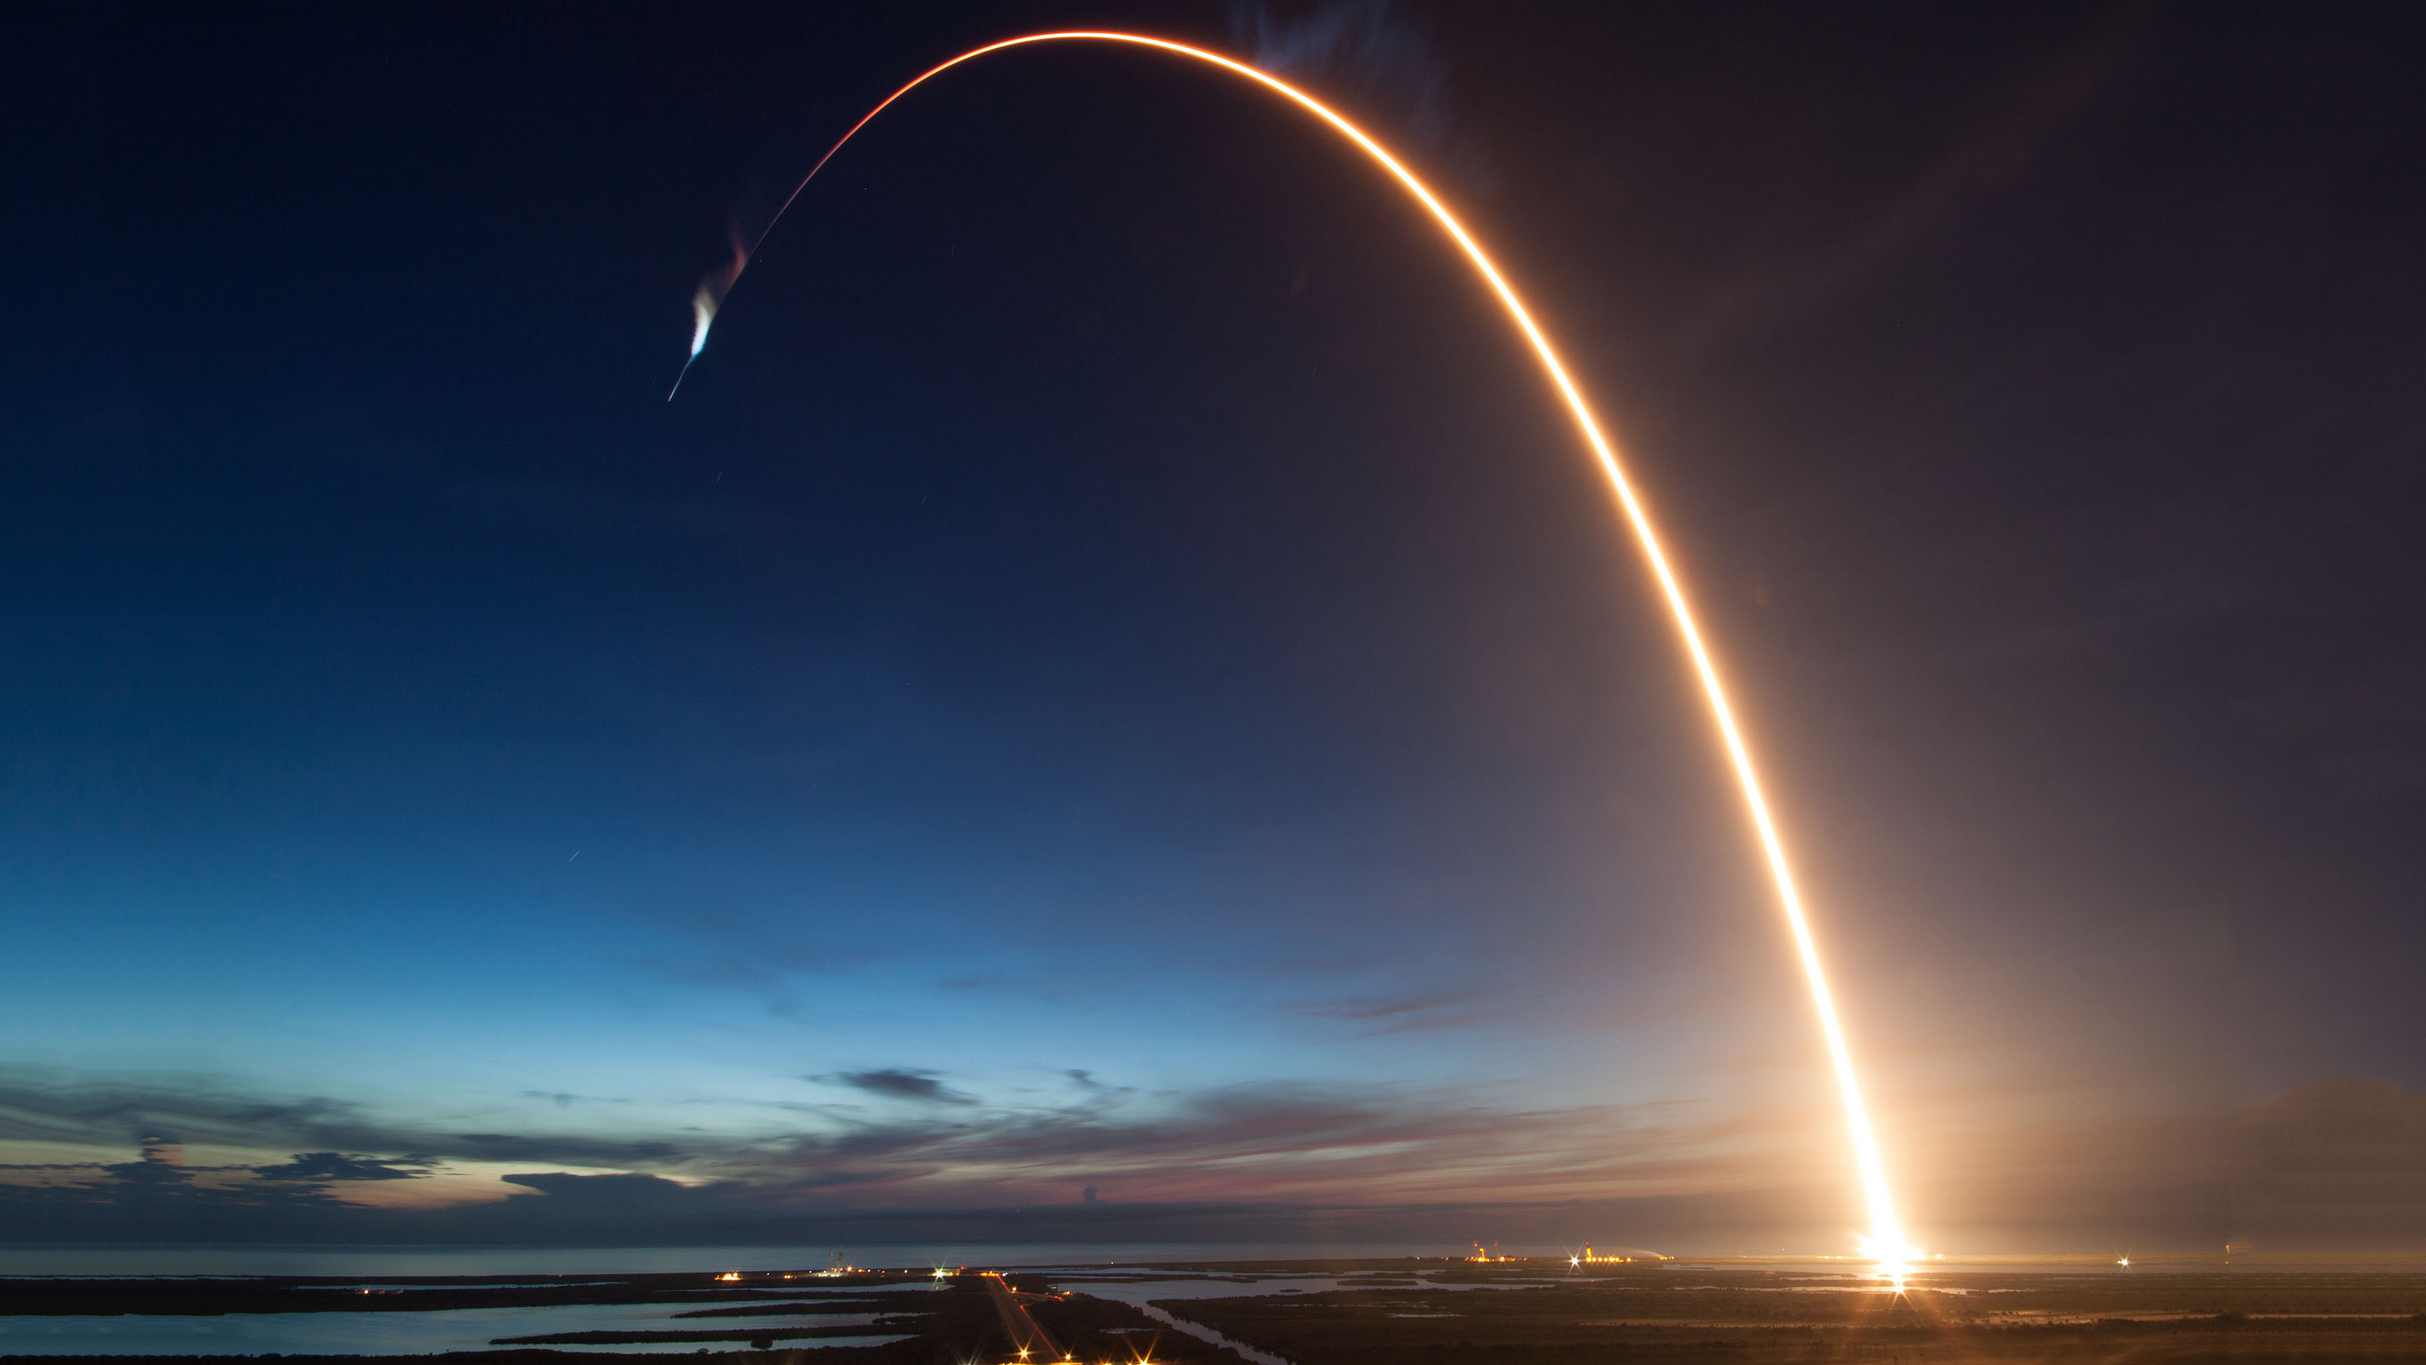 SpaceX released some stunning images of the Falcon 9 rocket launch. The